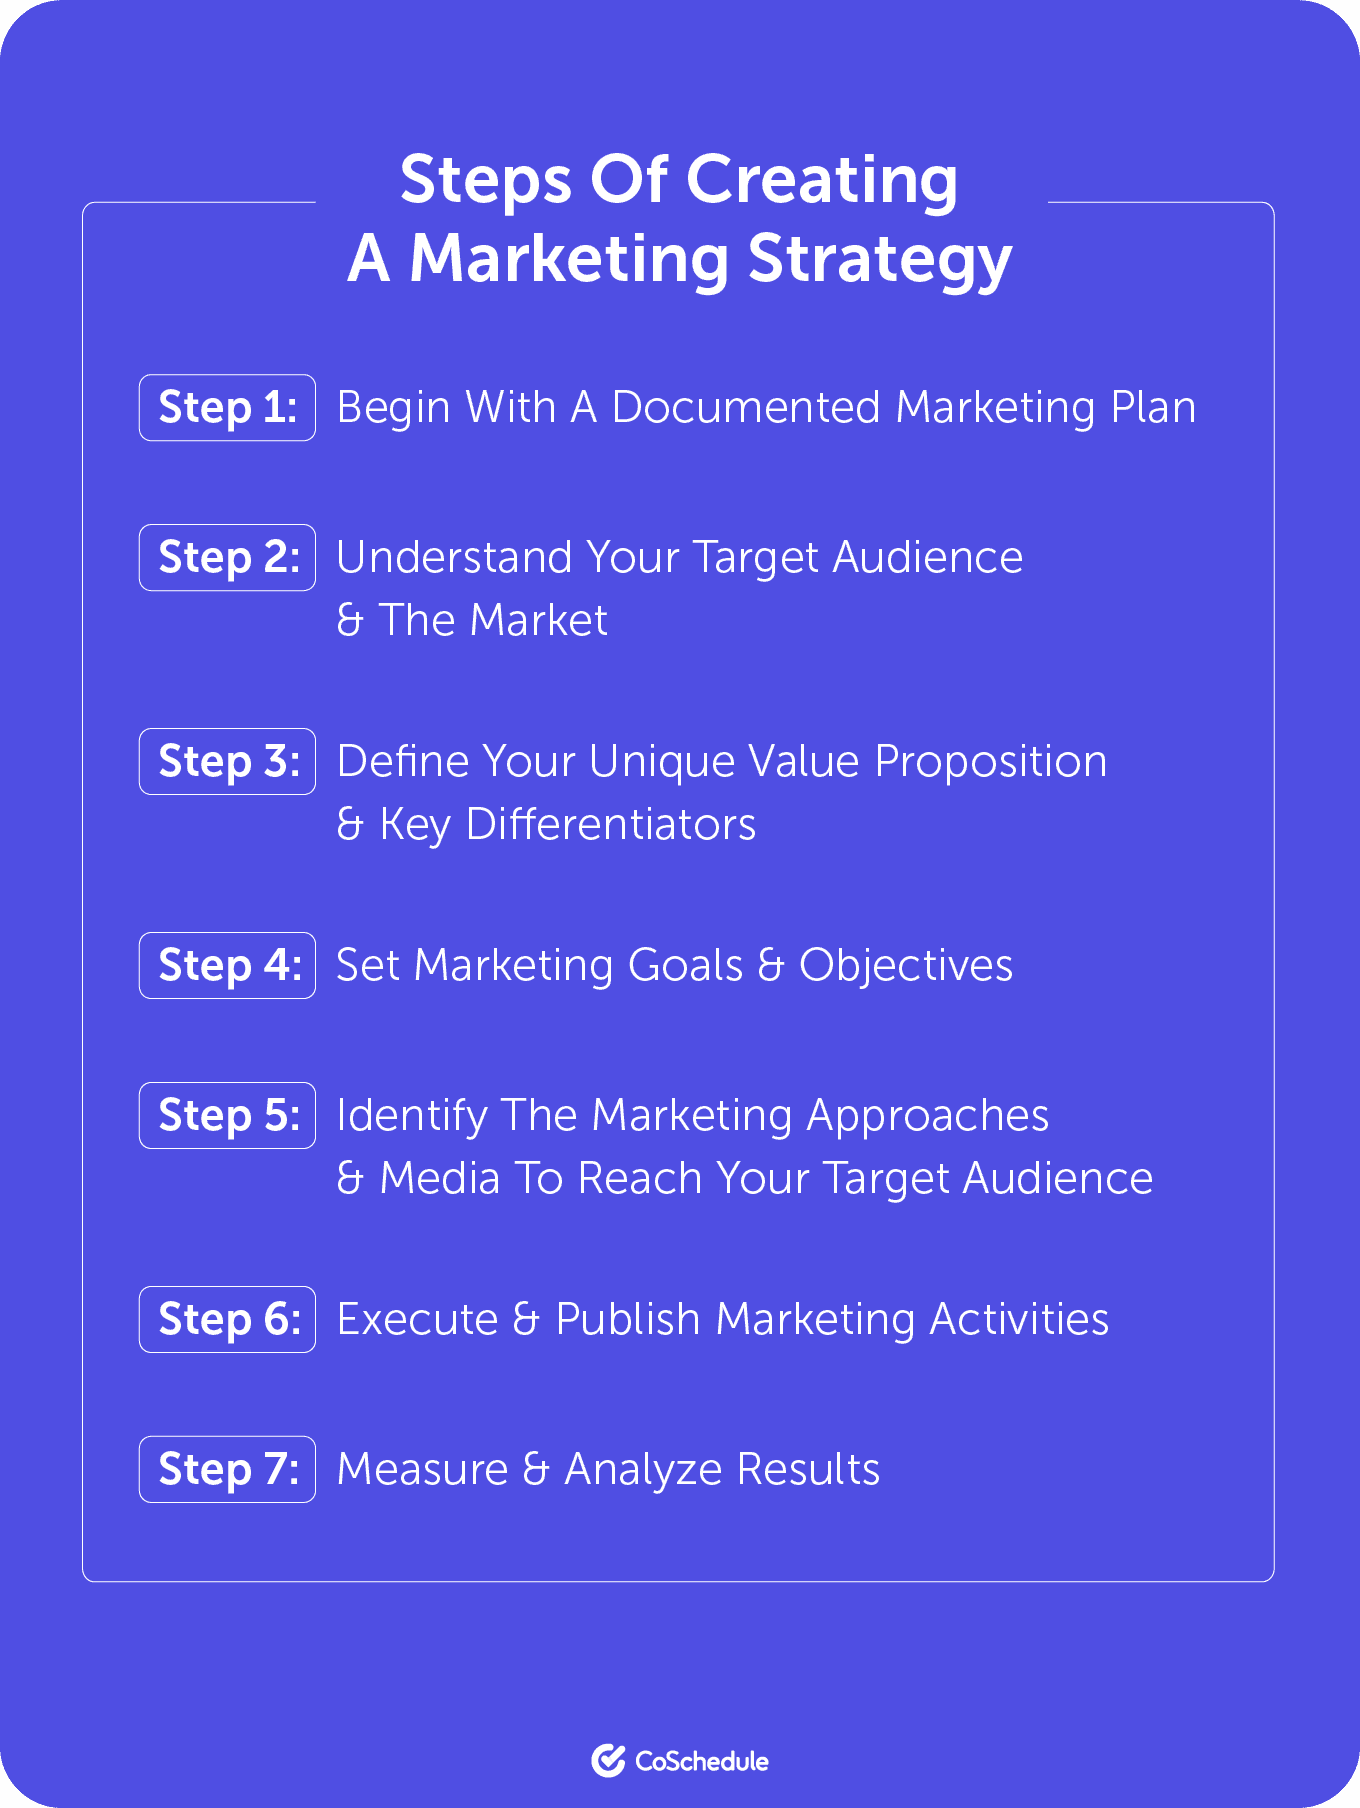 How to Develop a Marketing Strategy in 5 Simple Steps - Business2Community